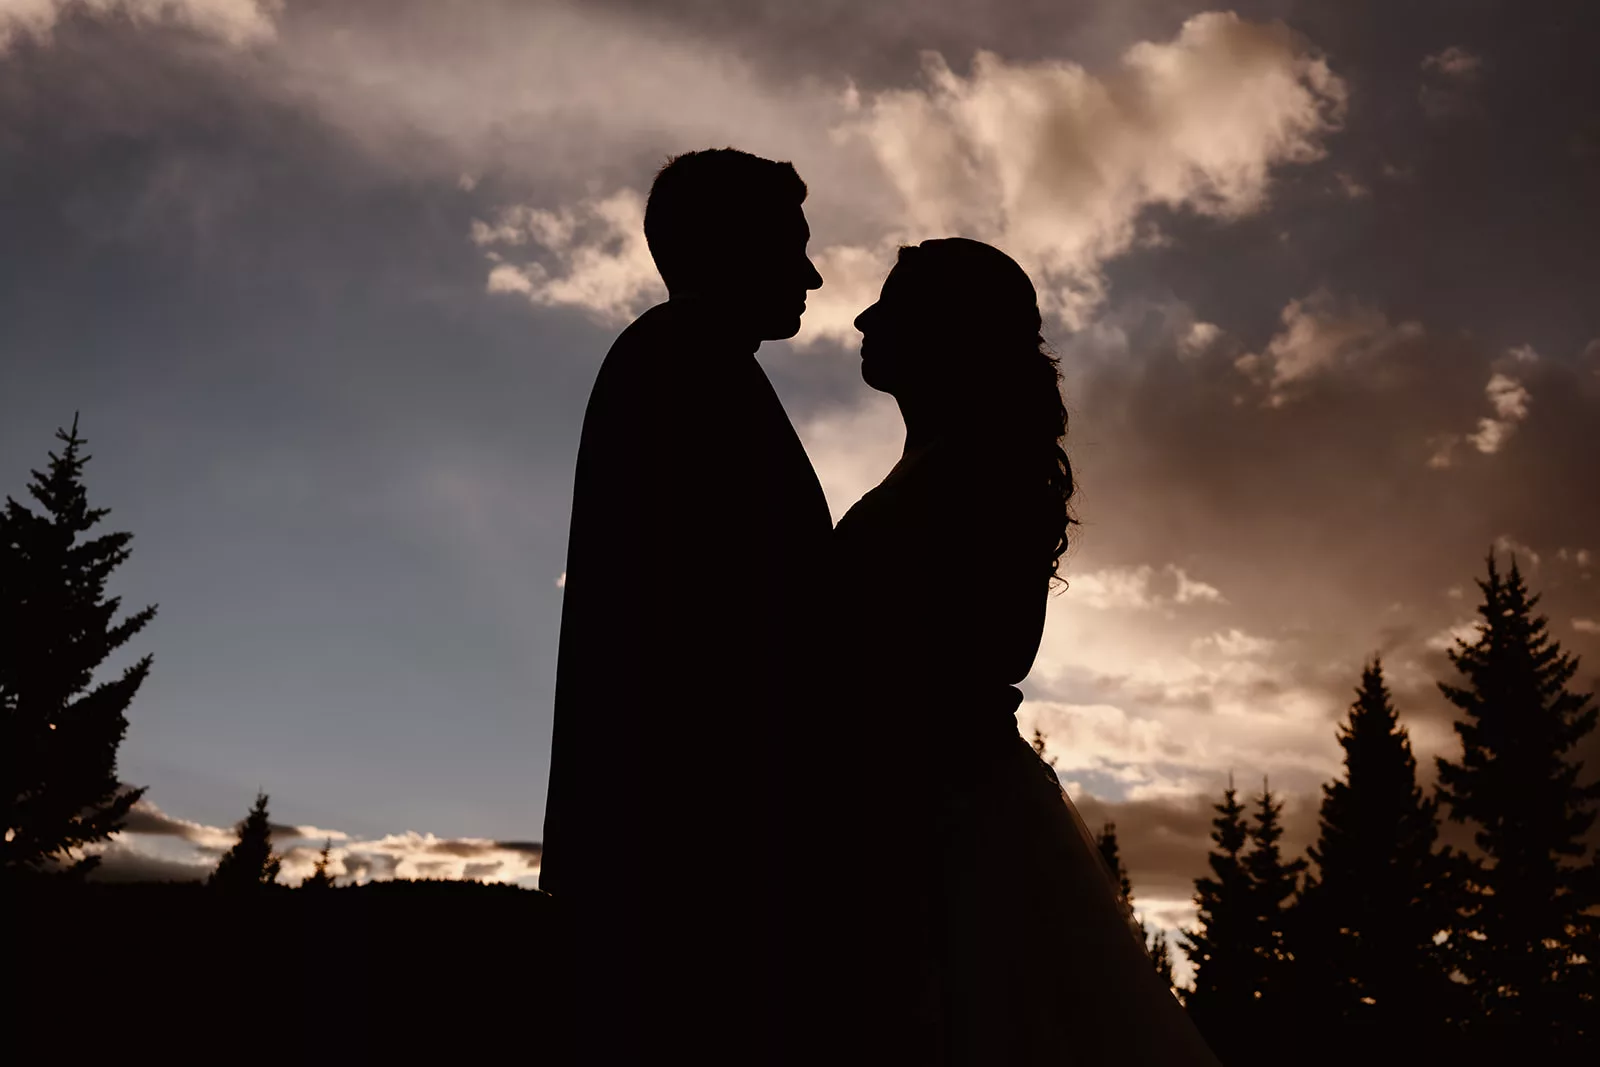 A newly married couples' silhouette is shown against a beautiful sunset.